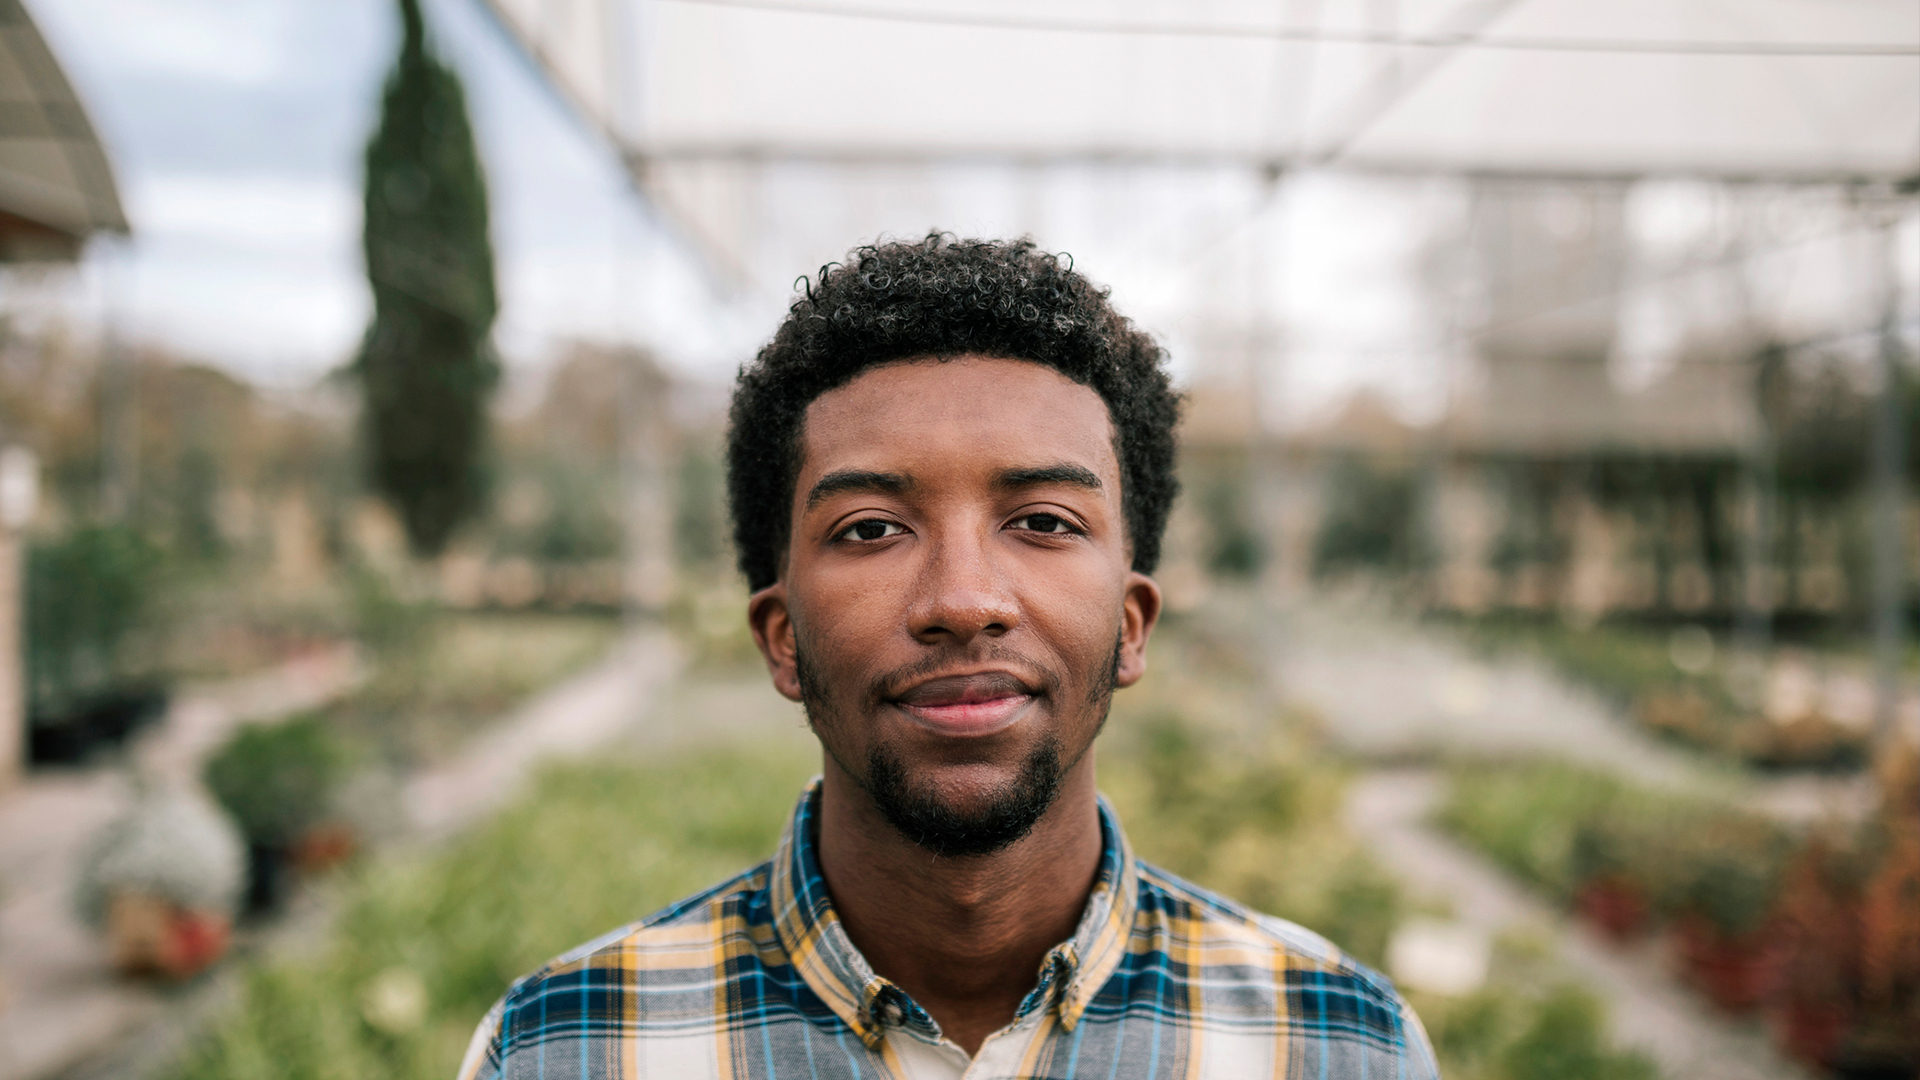 Black Farmer Fund Raises $11M In Funding To Support Black Agricultural Systems In The Northeast